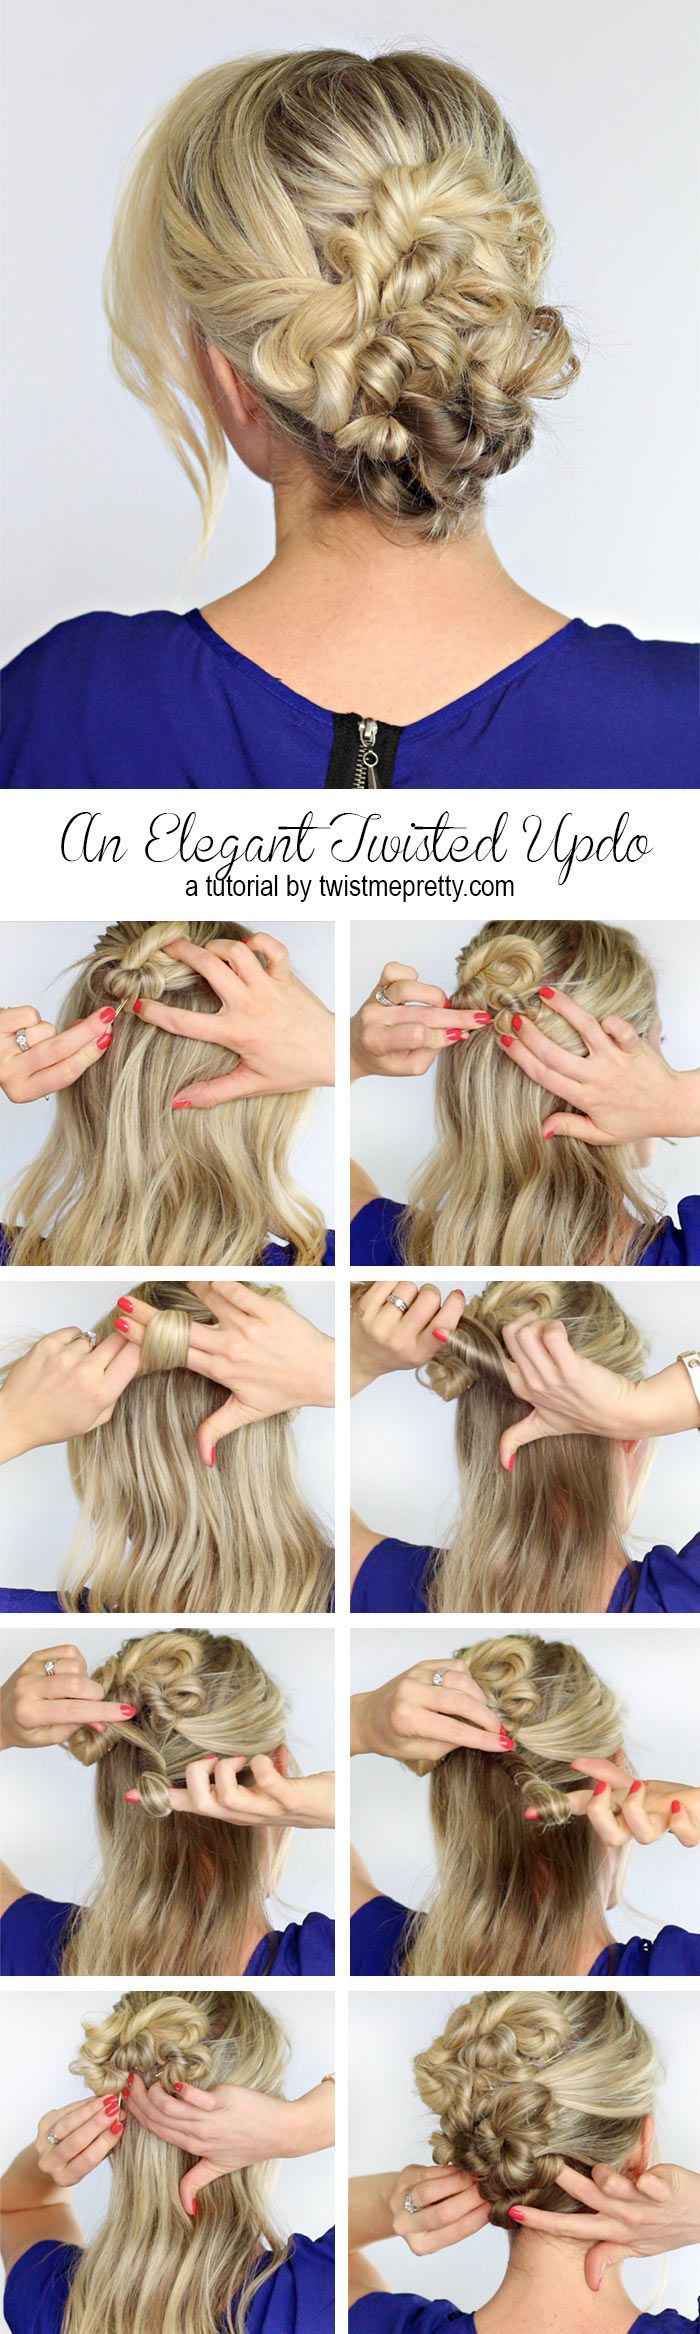 TOP 6 Quick & Easy Natural Hair Updos | BetterLength Hair